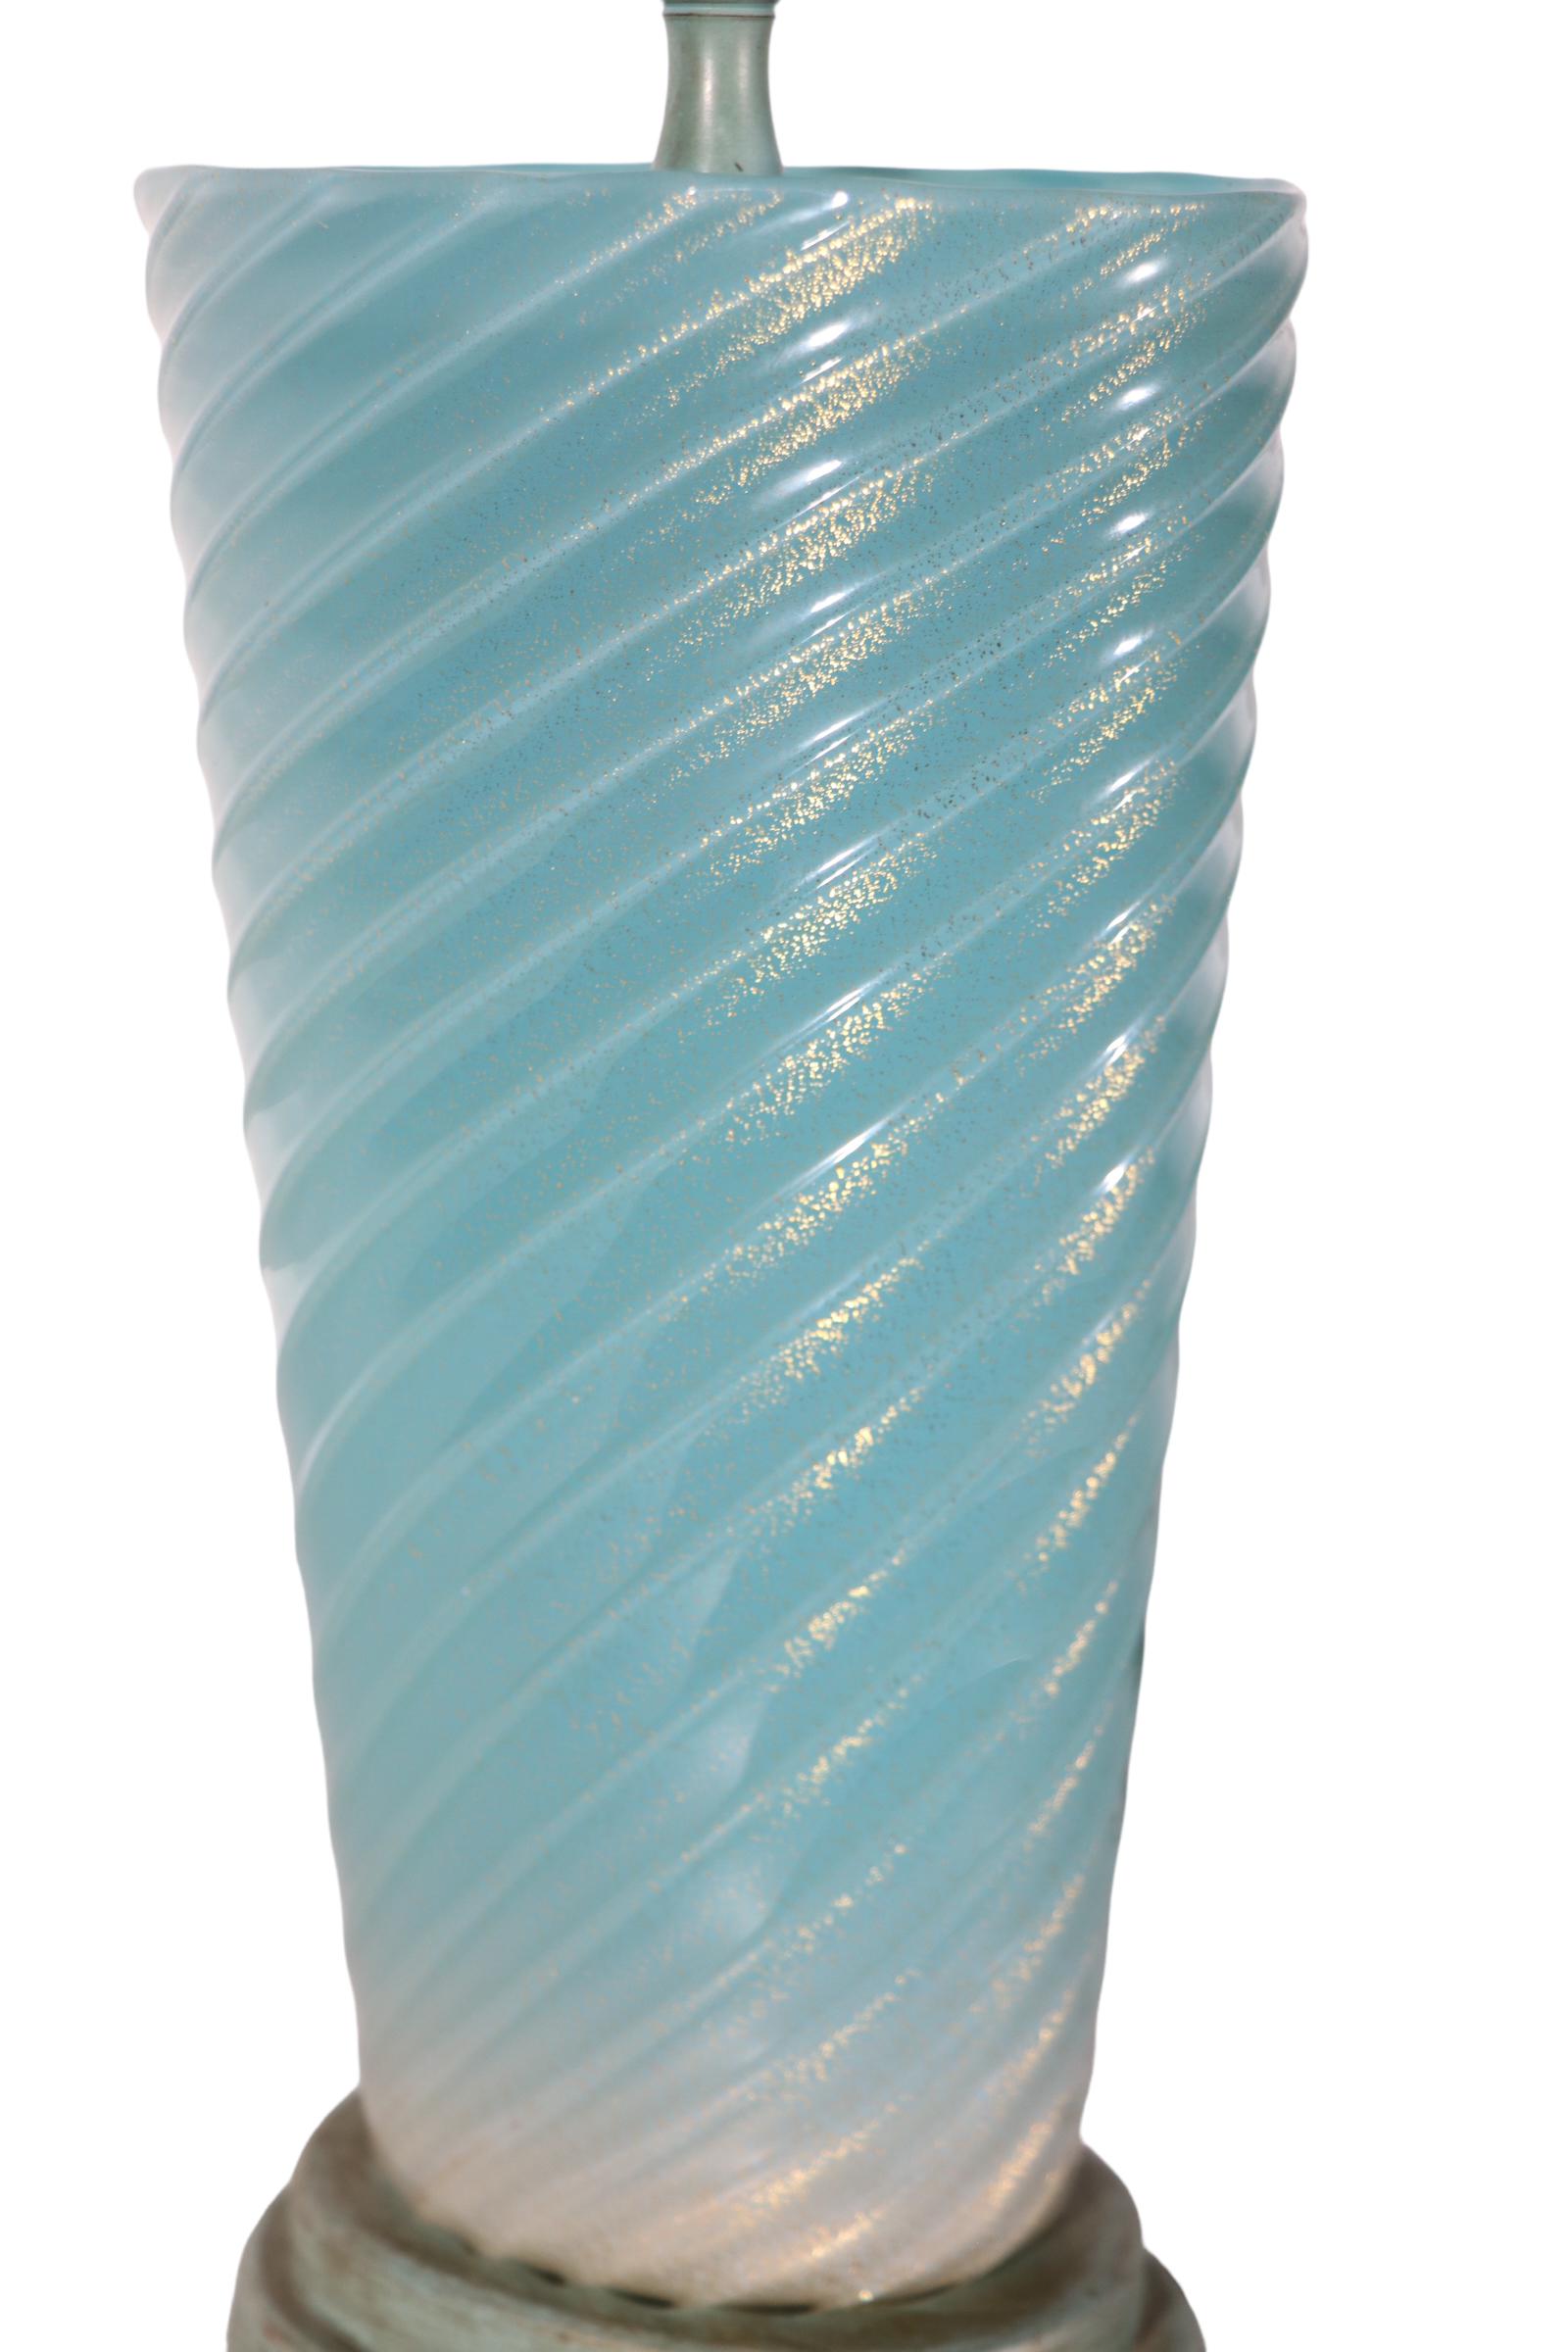 Murano Glass Lamp Blue Swirl with Gold Inclusion possibly Fratelli Toso, Seguso  For Sale 8